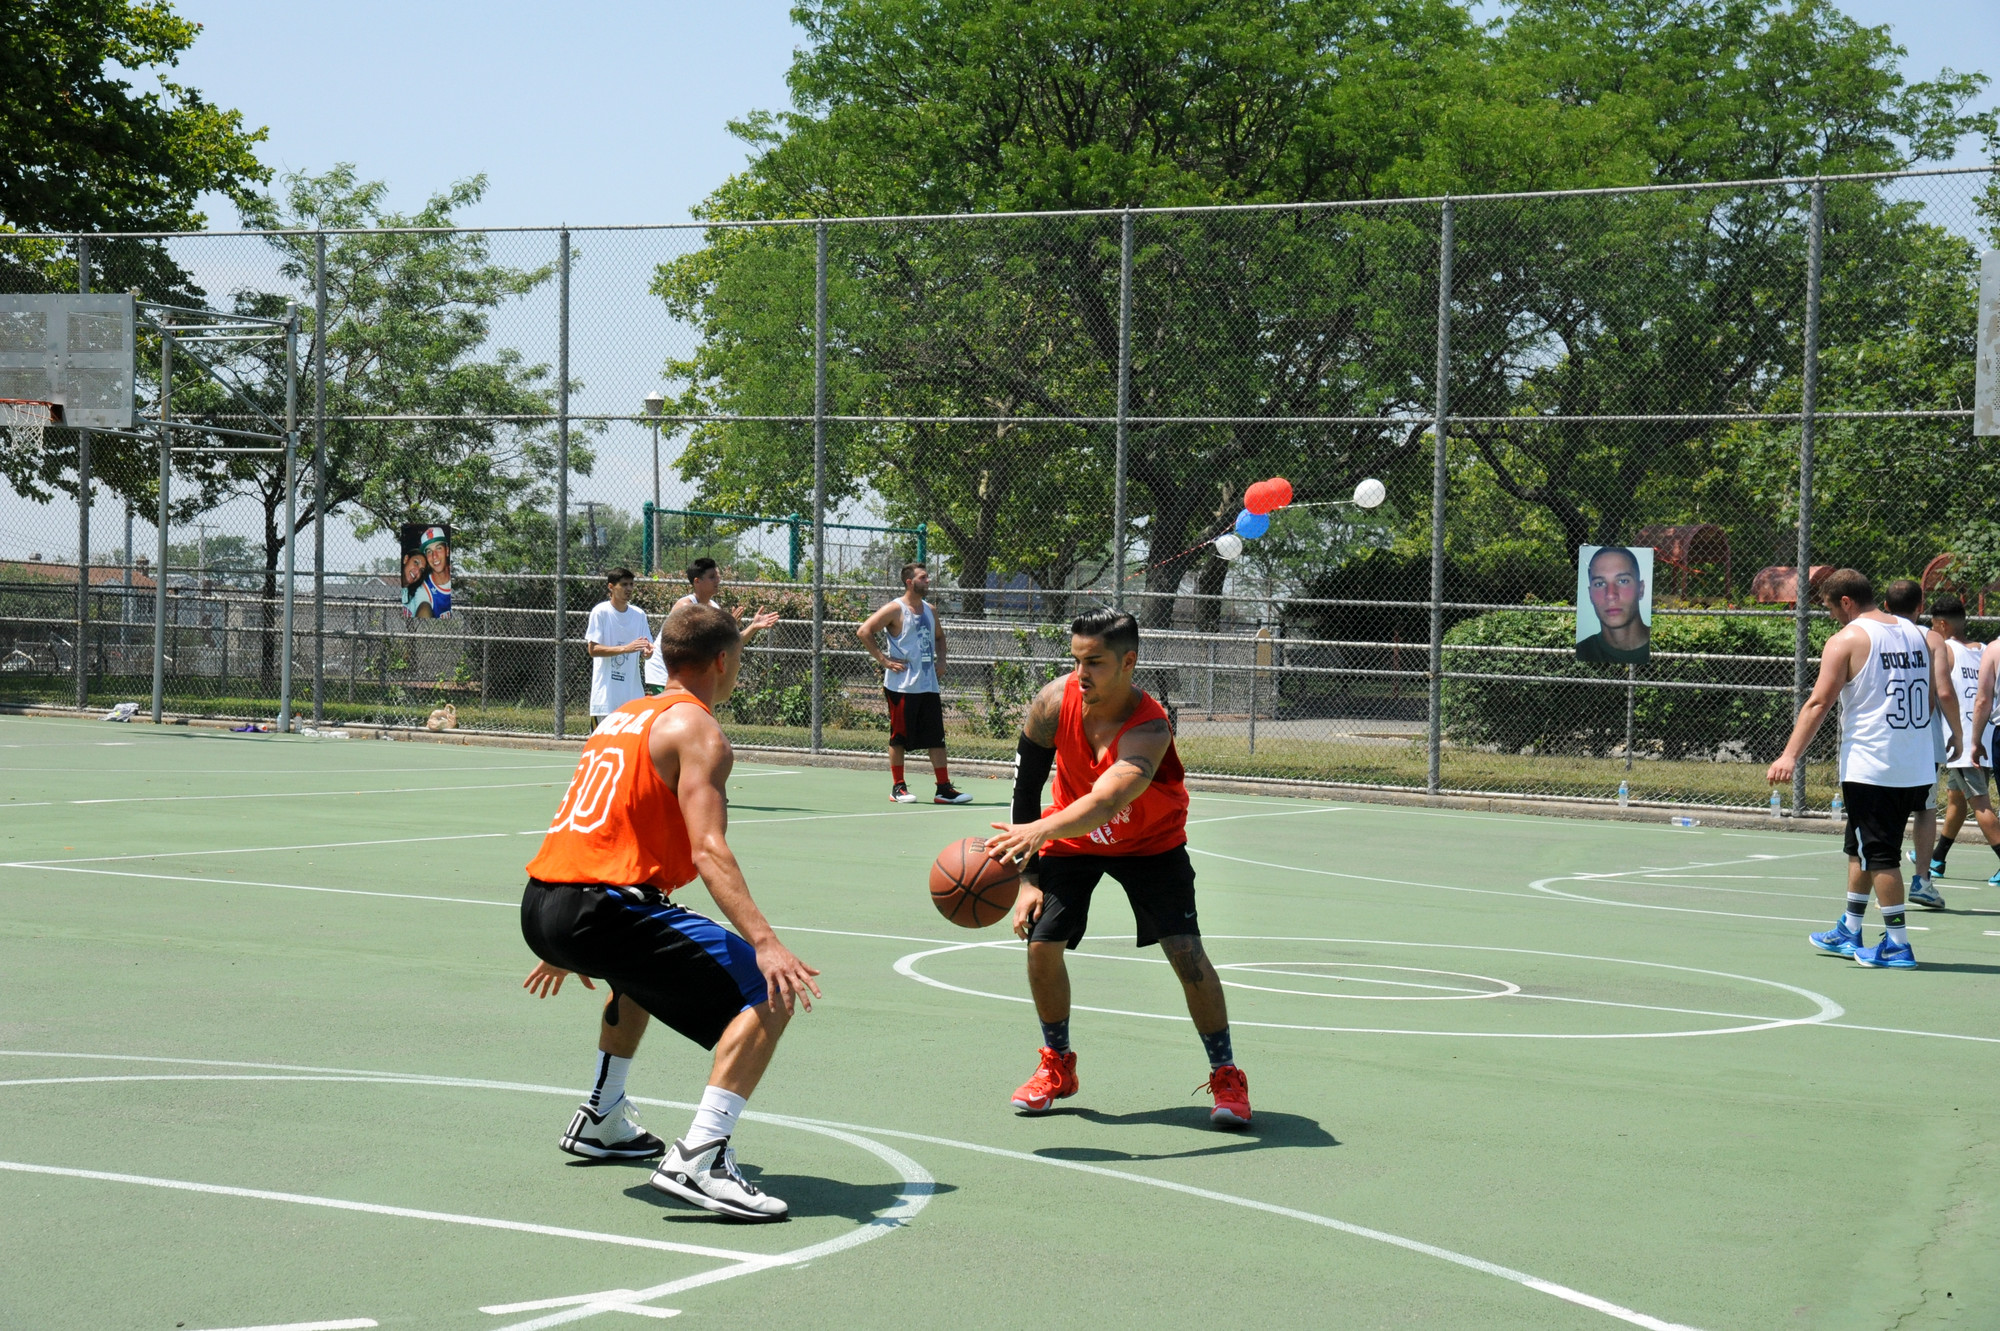 Justin Buckley, right, played basketball at the tournament for his brother. Penny Frondelli/Herald